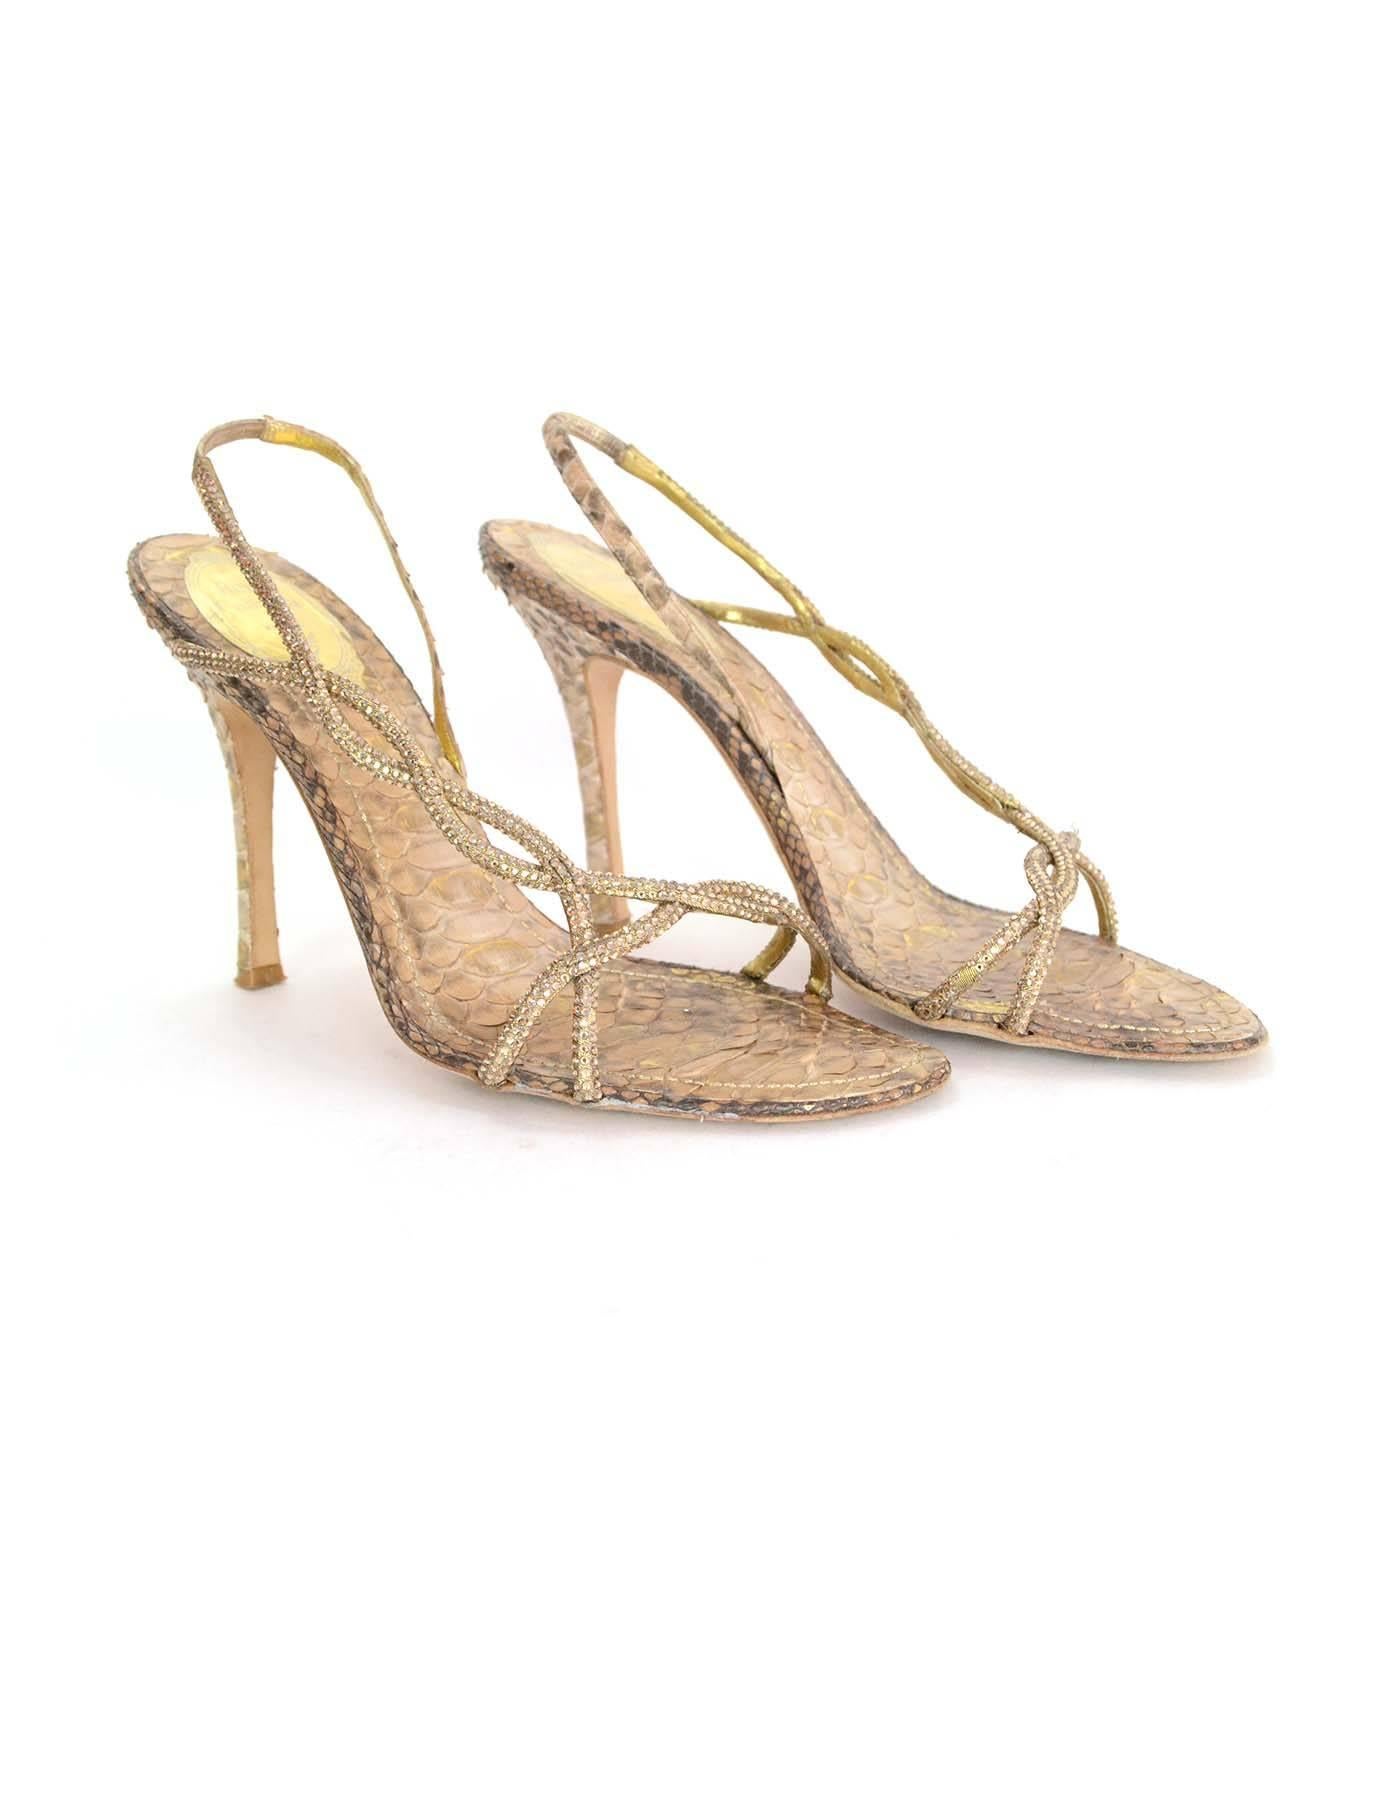 Rene Caovilla Pave Crystal and Snakeskin Sandals Sz 39 In Excellent Condition In New York, NY